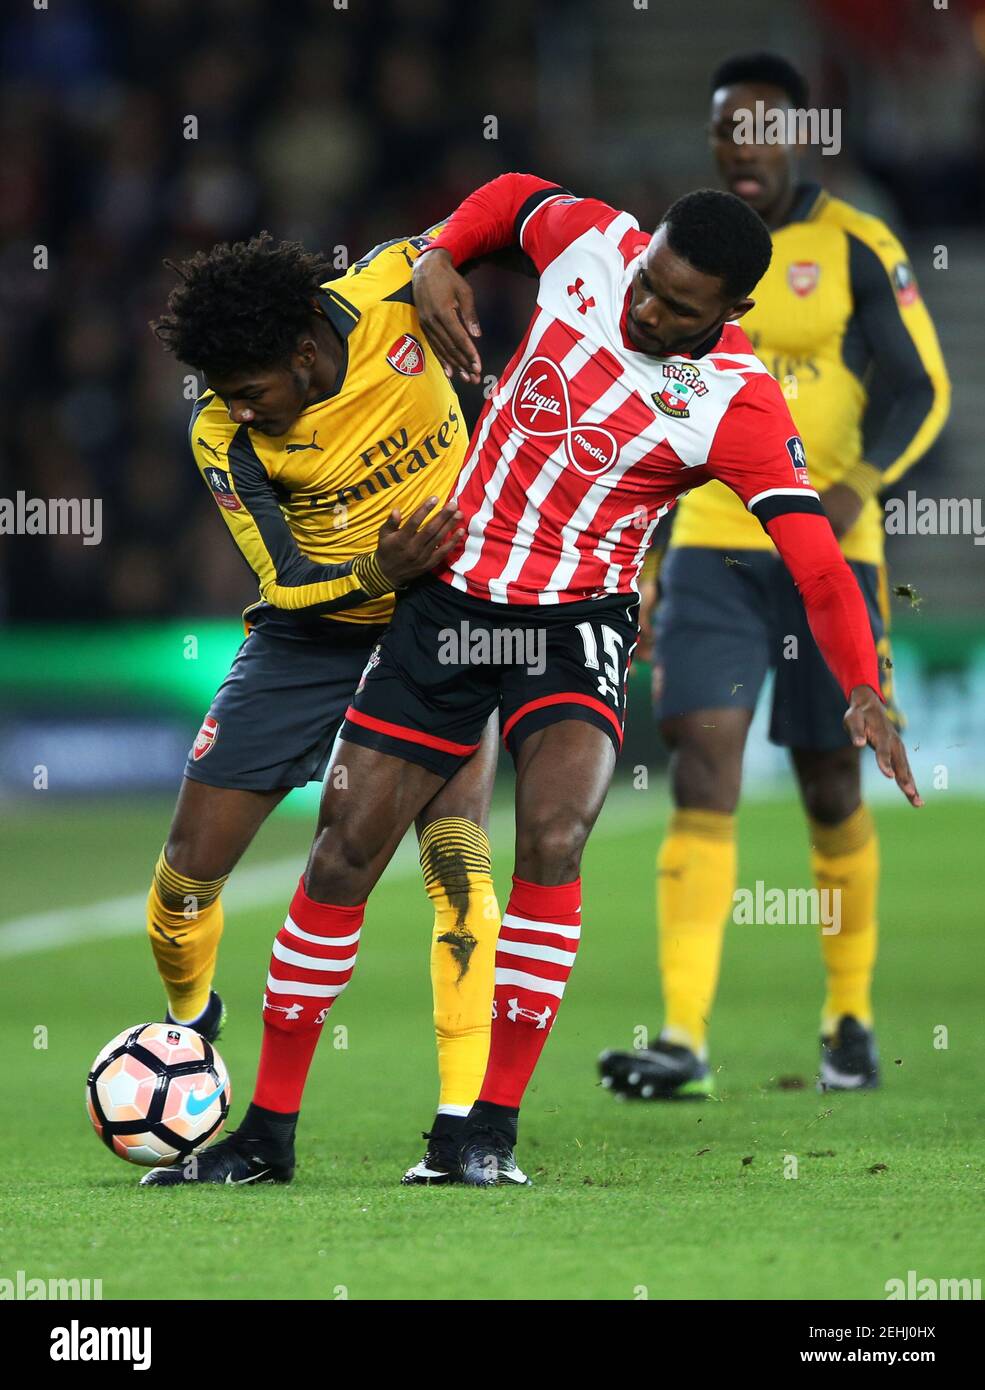 Britain Football Soccer - Southampton v Arsenal - FA Cup Fourth Round - St Mary's Stadium - 28/1/17 Southampton's Cuco Martina in action with Arsenal's Ainsley Maitland-Niles  Reuters / Paul Hackett Livepic EDITORIAL USE ONLY. No use with unauthorized audio, video, data, fixture lists, club/league logos or 'live' services. Online in-match use limited to 45 images, no video emulation. No use in betting, games or single club/league/player publications.  Please contact your account representative for further details. Stock Photo